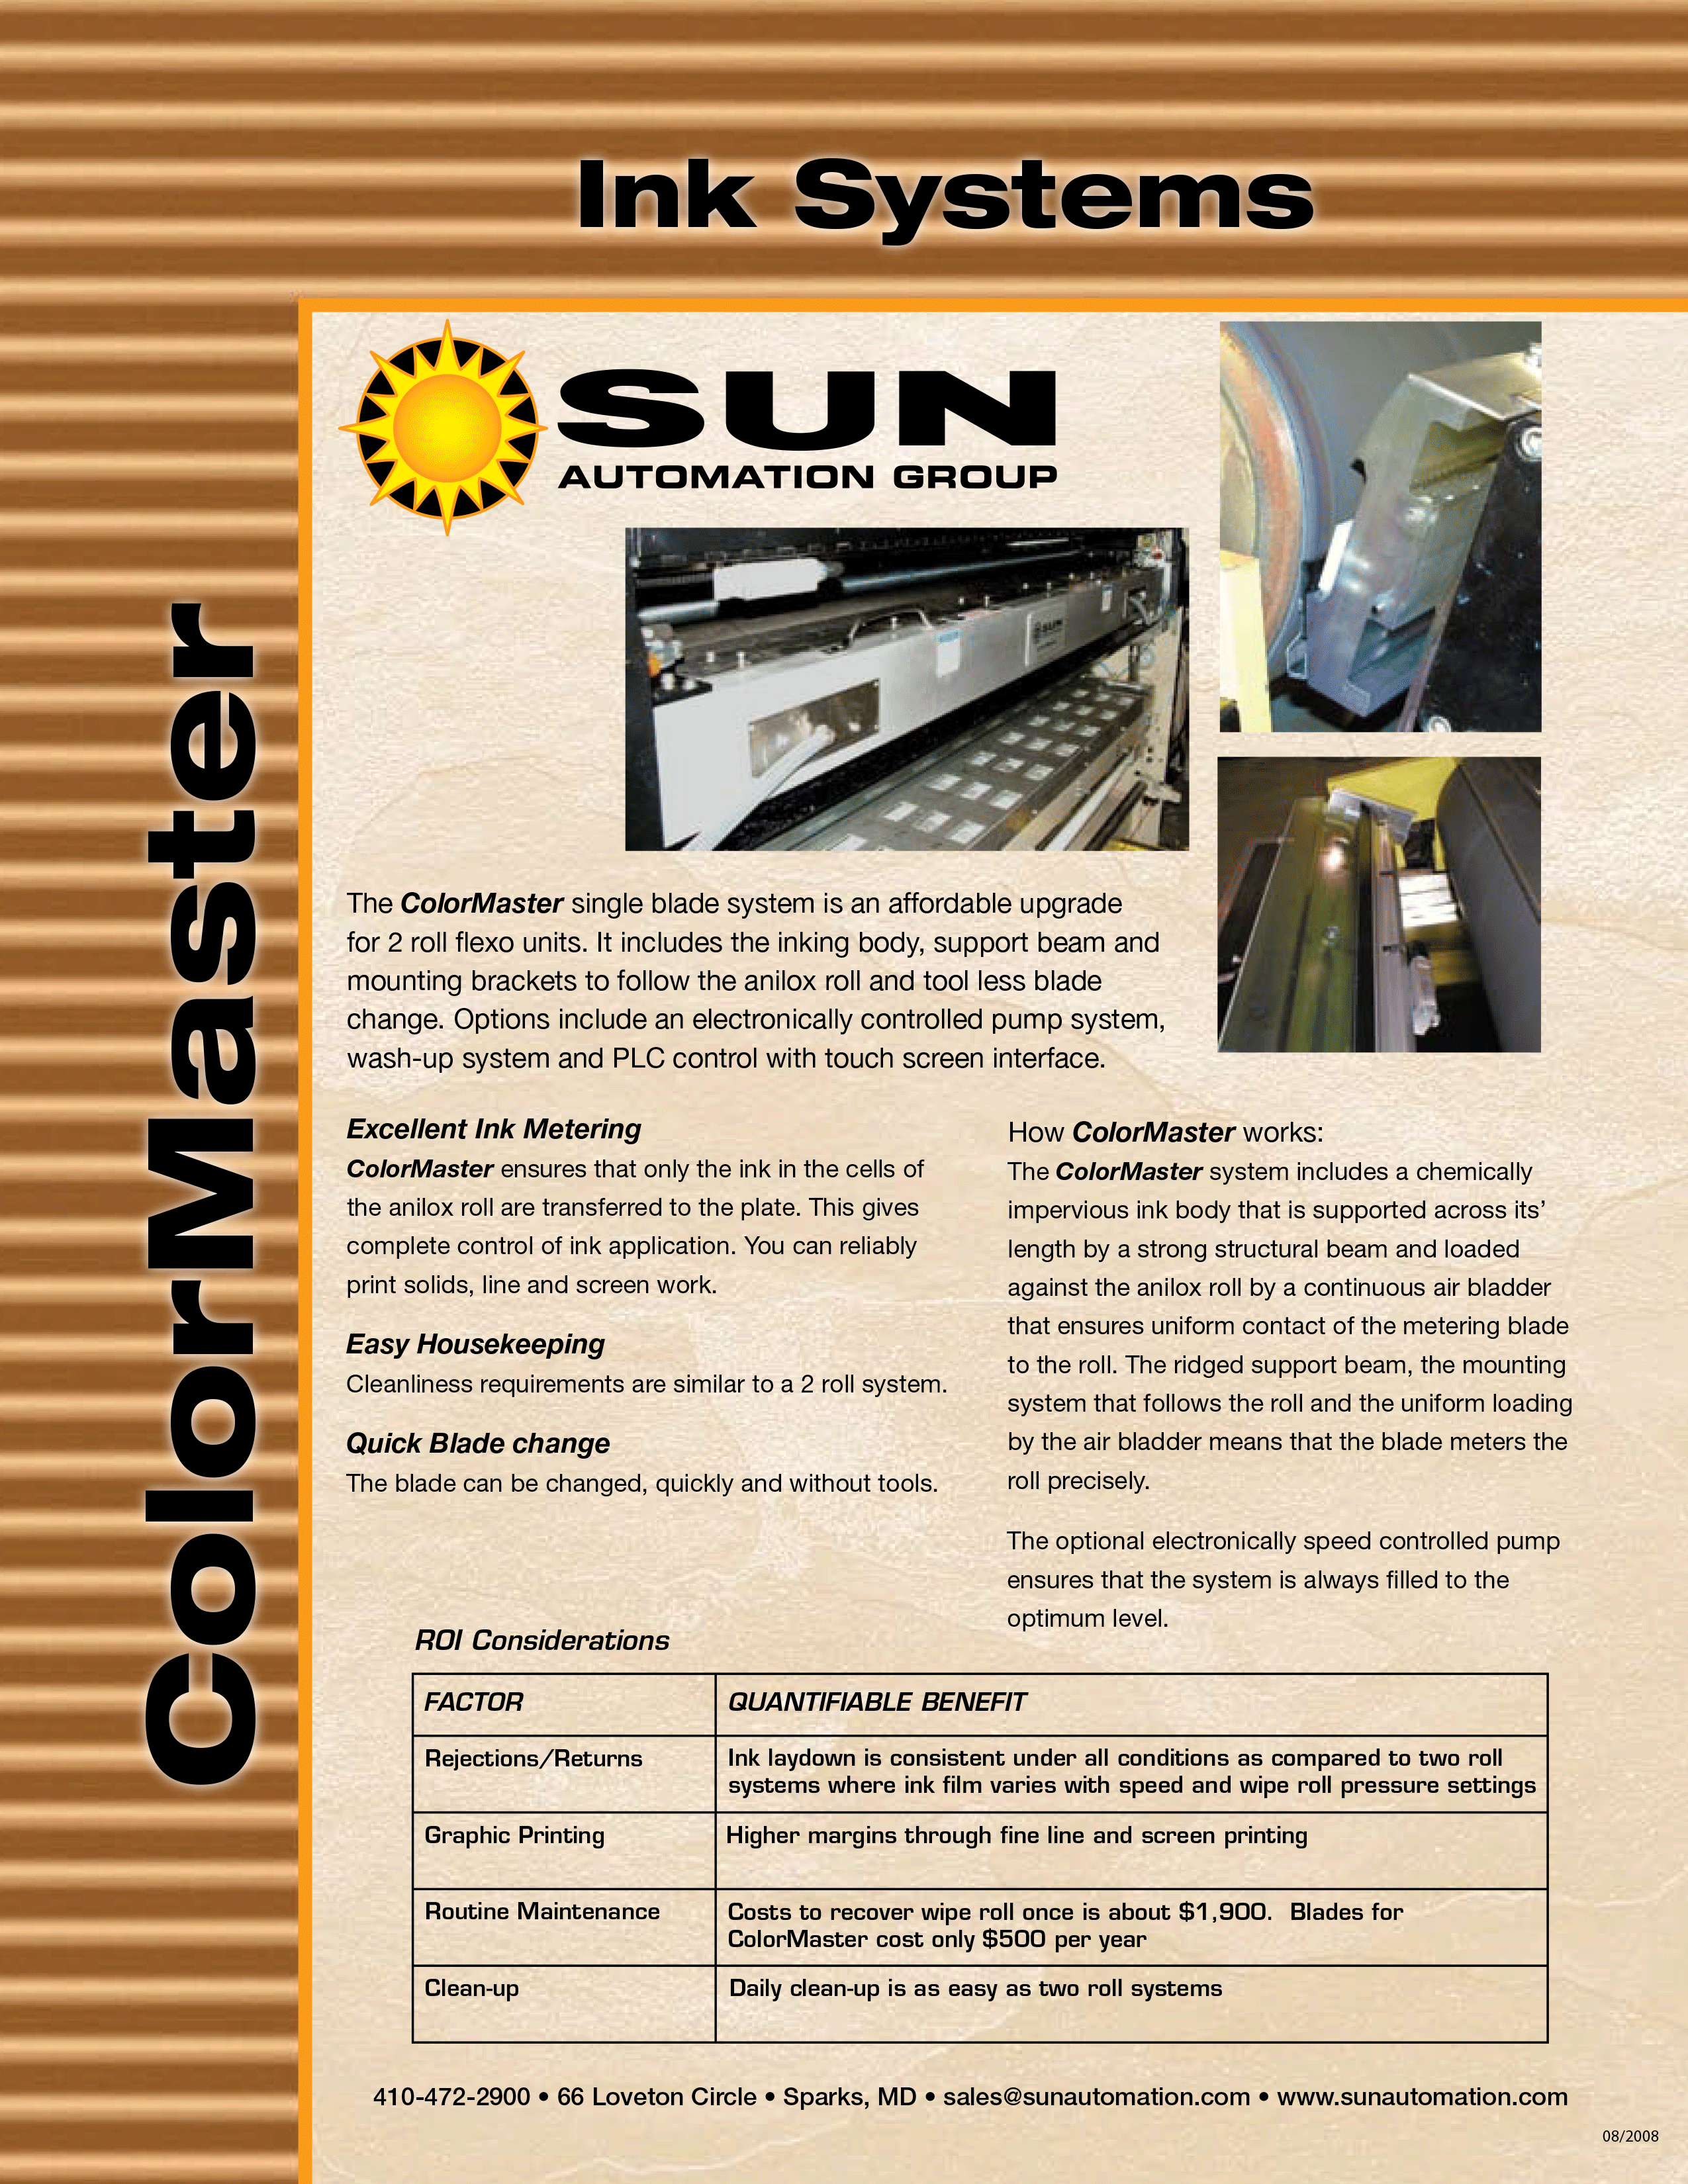 Learn more about Sun Automation’s ColorMaster Single Blade System in their brochure.